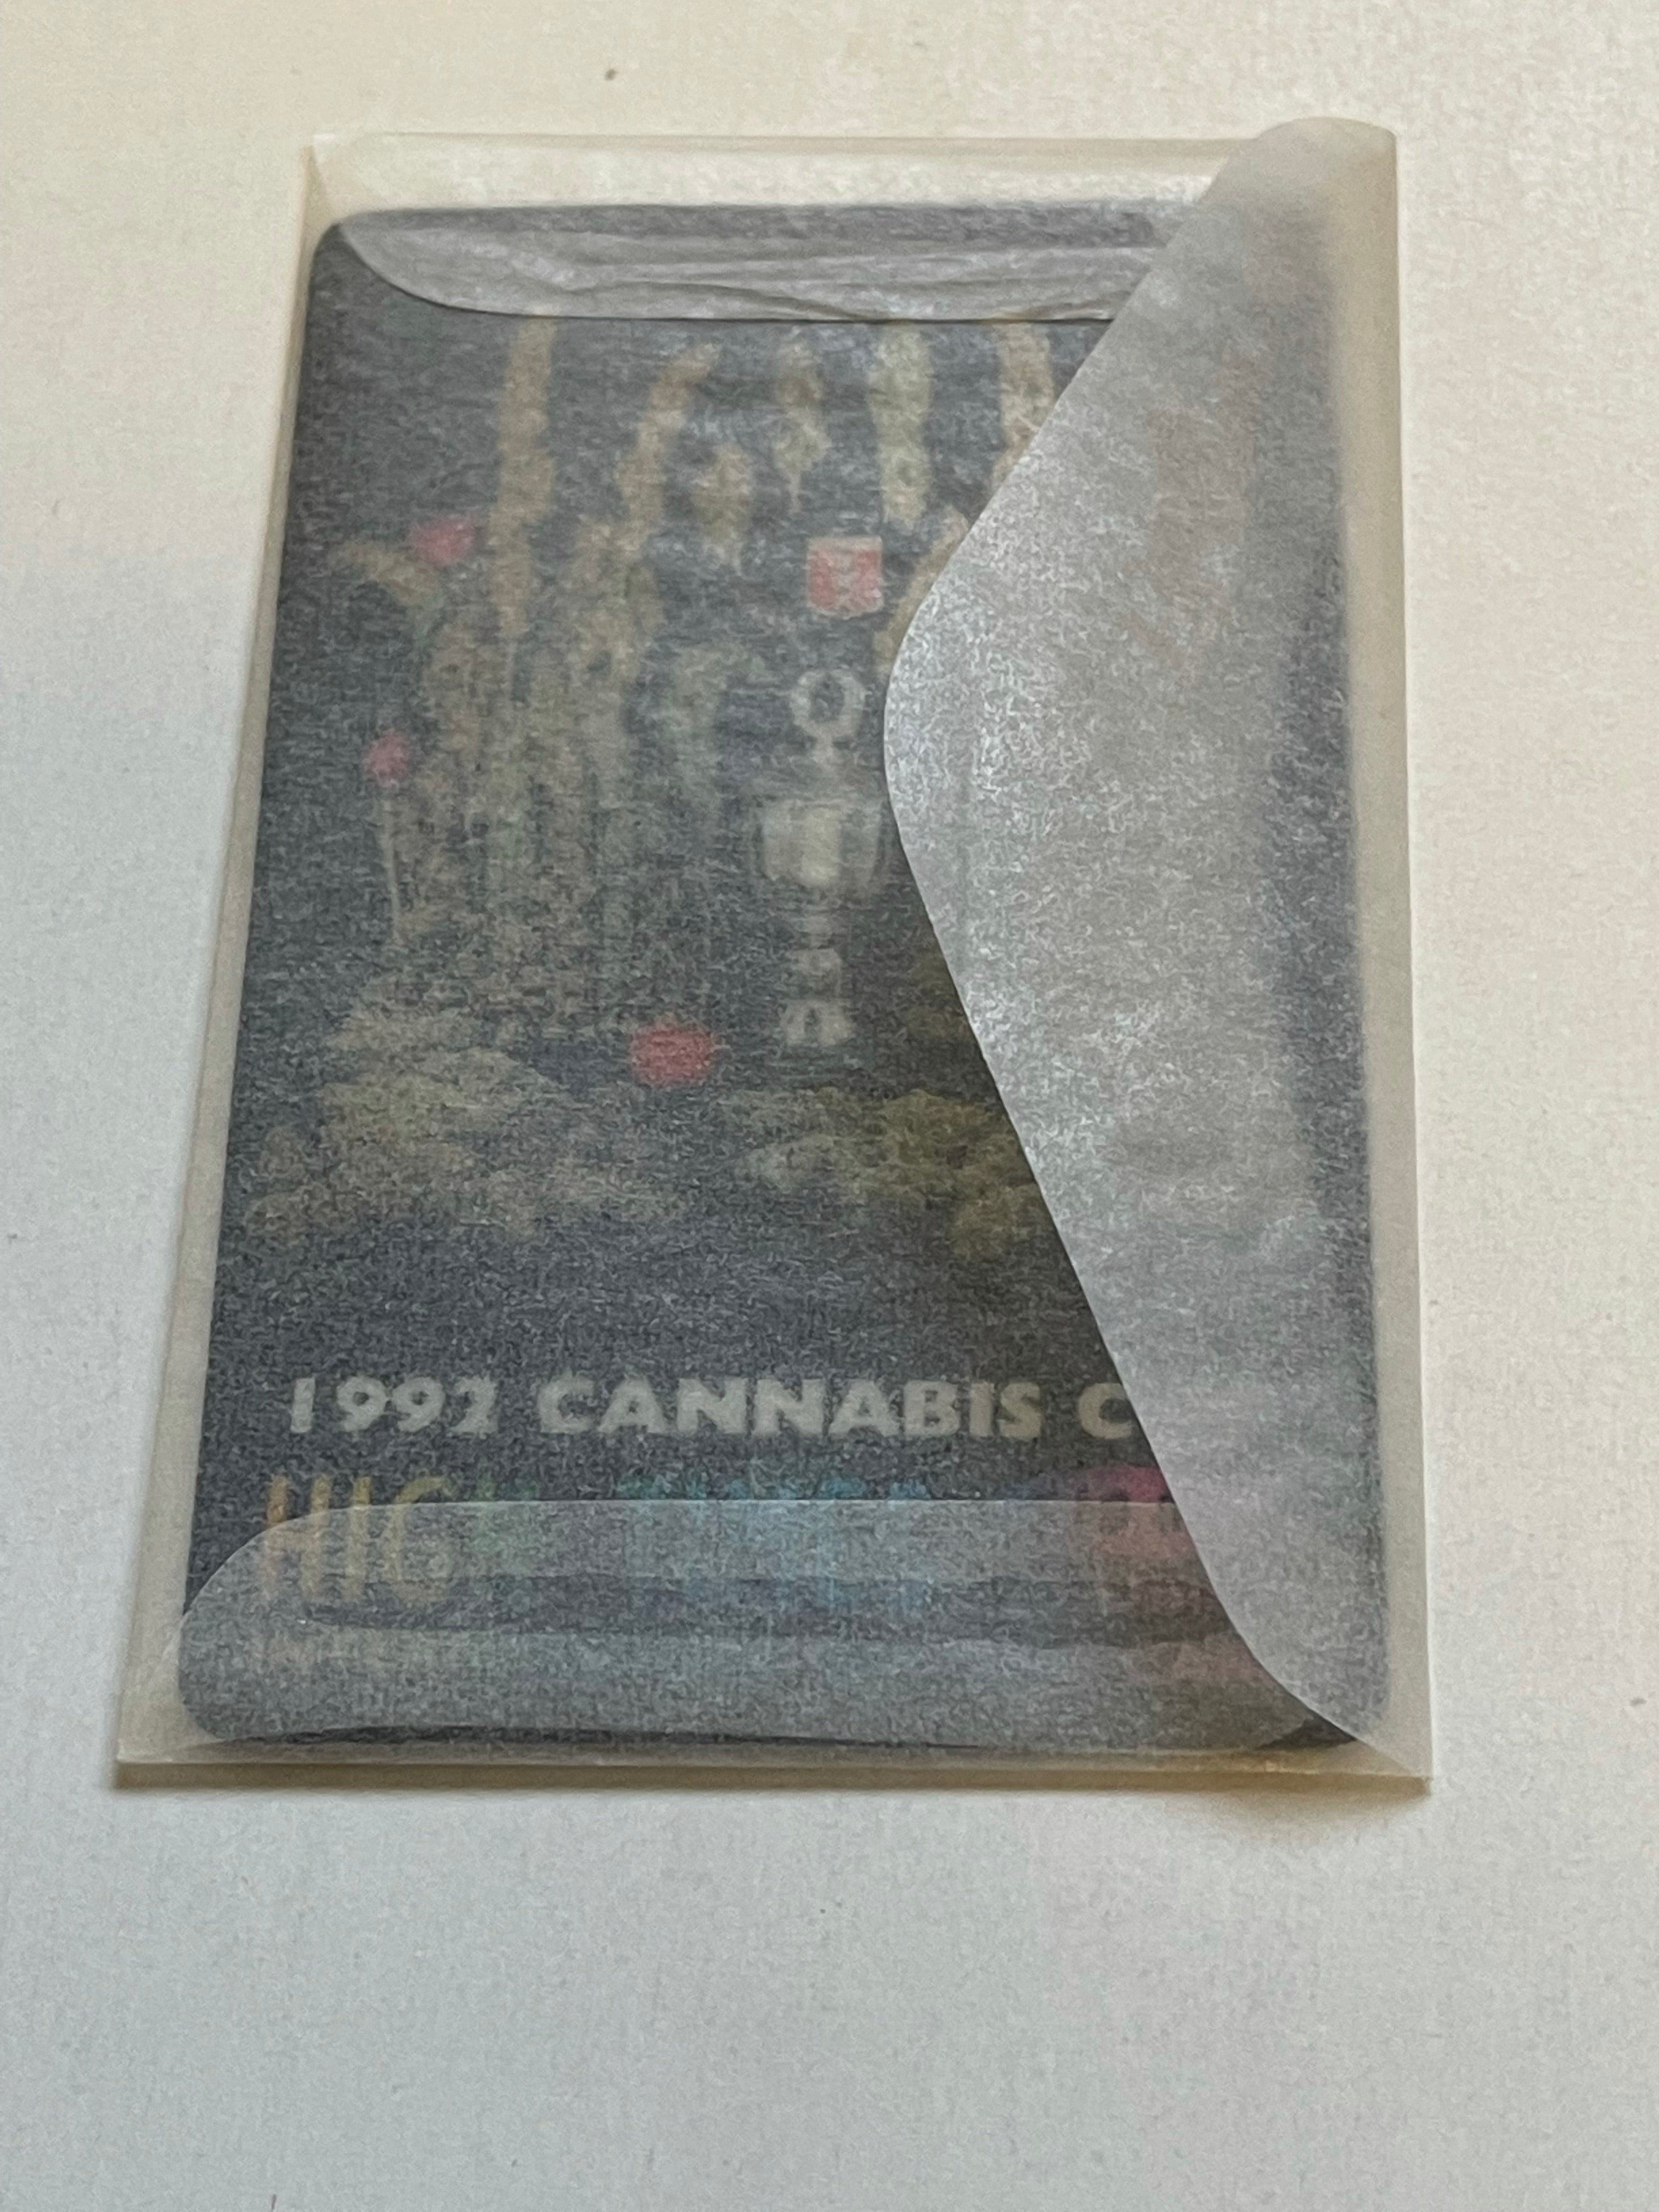 High Times Canada cup phonecard